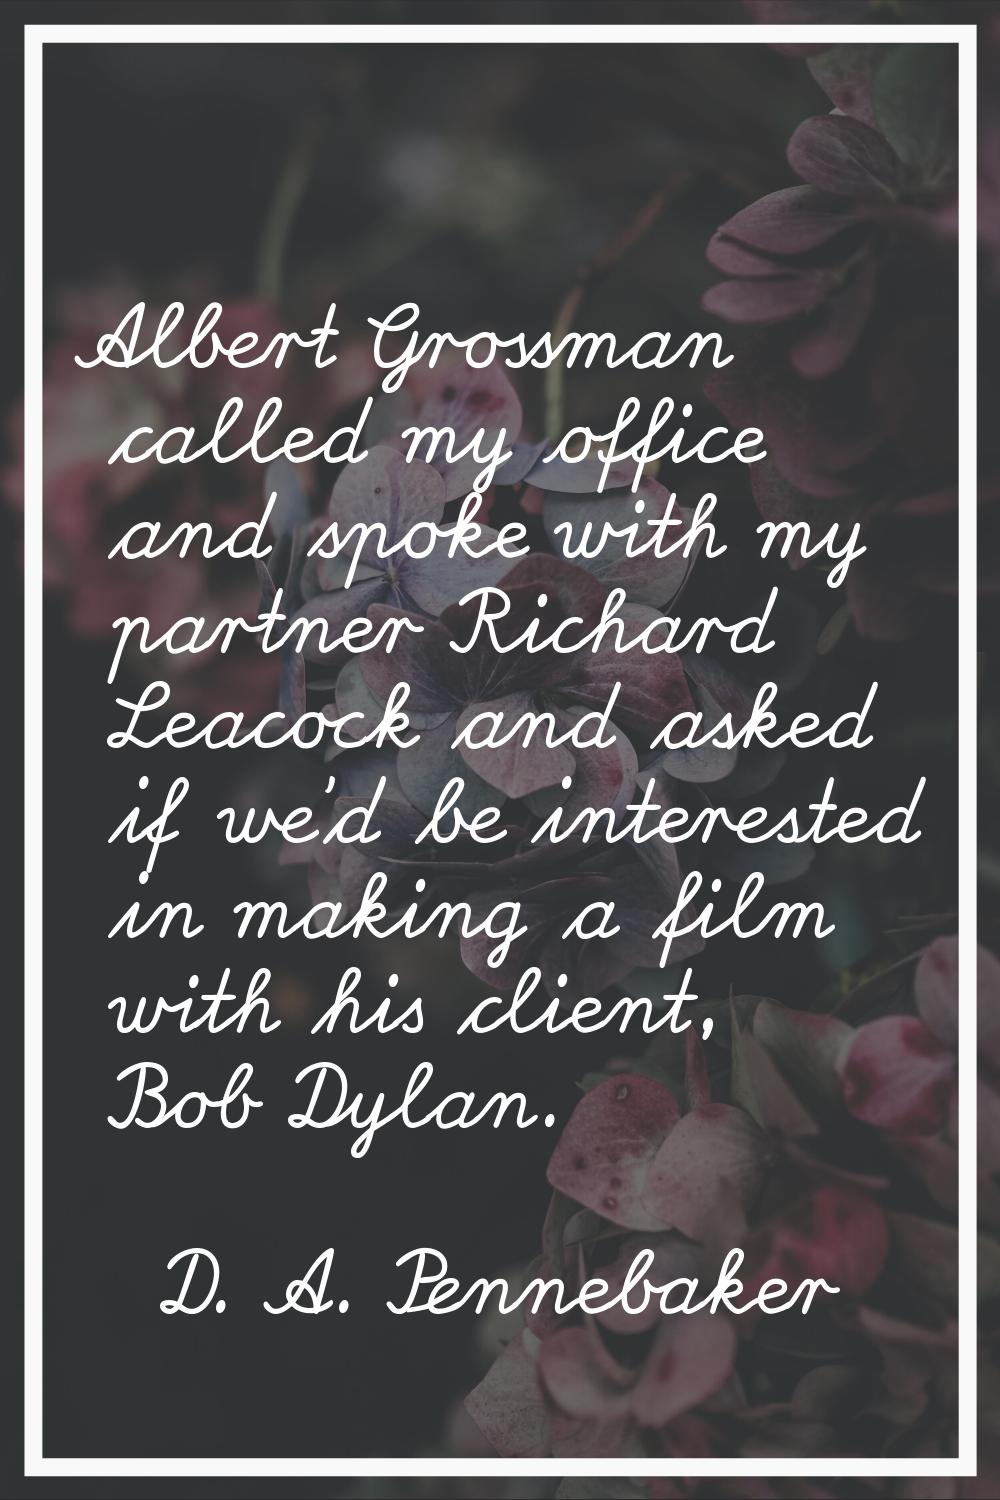 Albert Grossman called my office and spoke with my partner Richard Leacock and asked if we'd be int